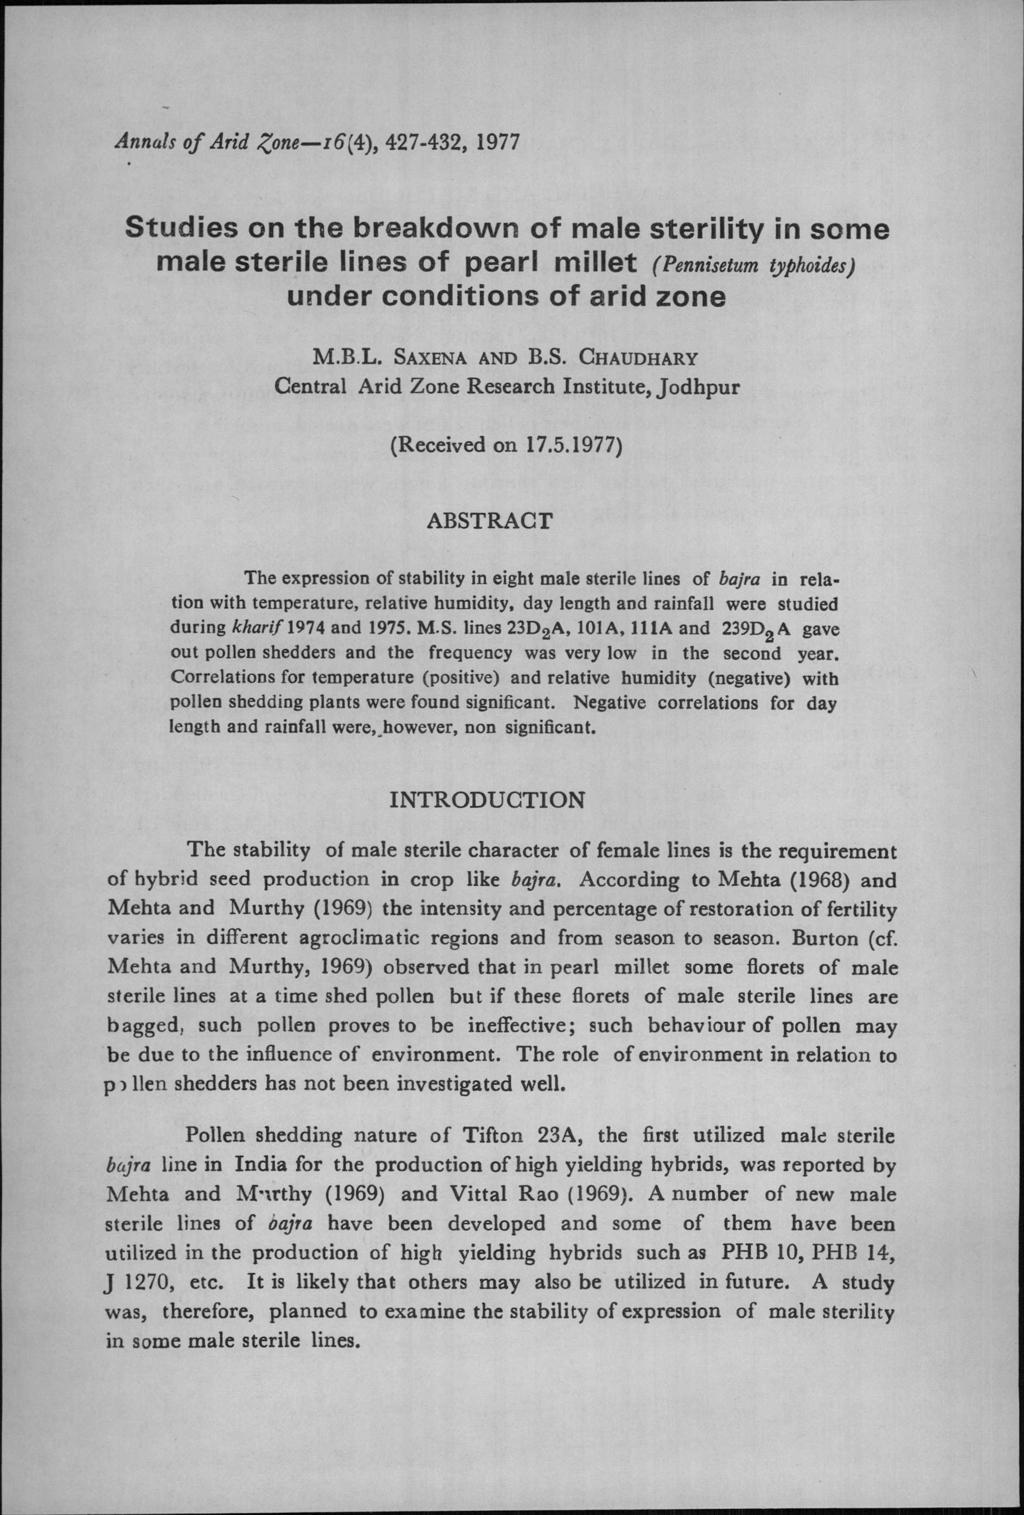 Annals of Arid Zone16(4), 427432, 1977 Studies on the breakdown of male sterility in some male sterile lines of pearl millet (Pennisetum typhoides) under conditions of arid zone M.B.L. SAXENAAND B.S. CHAUDHARY Central Arid Zone Research Institute, Jodhpur (Received on 17.